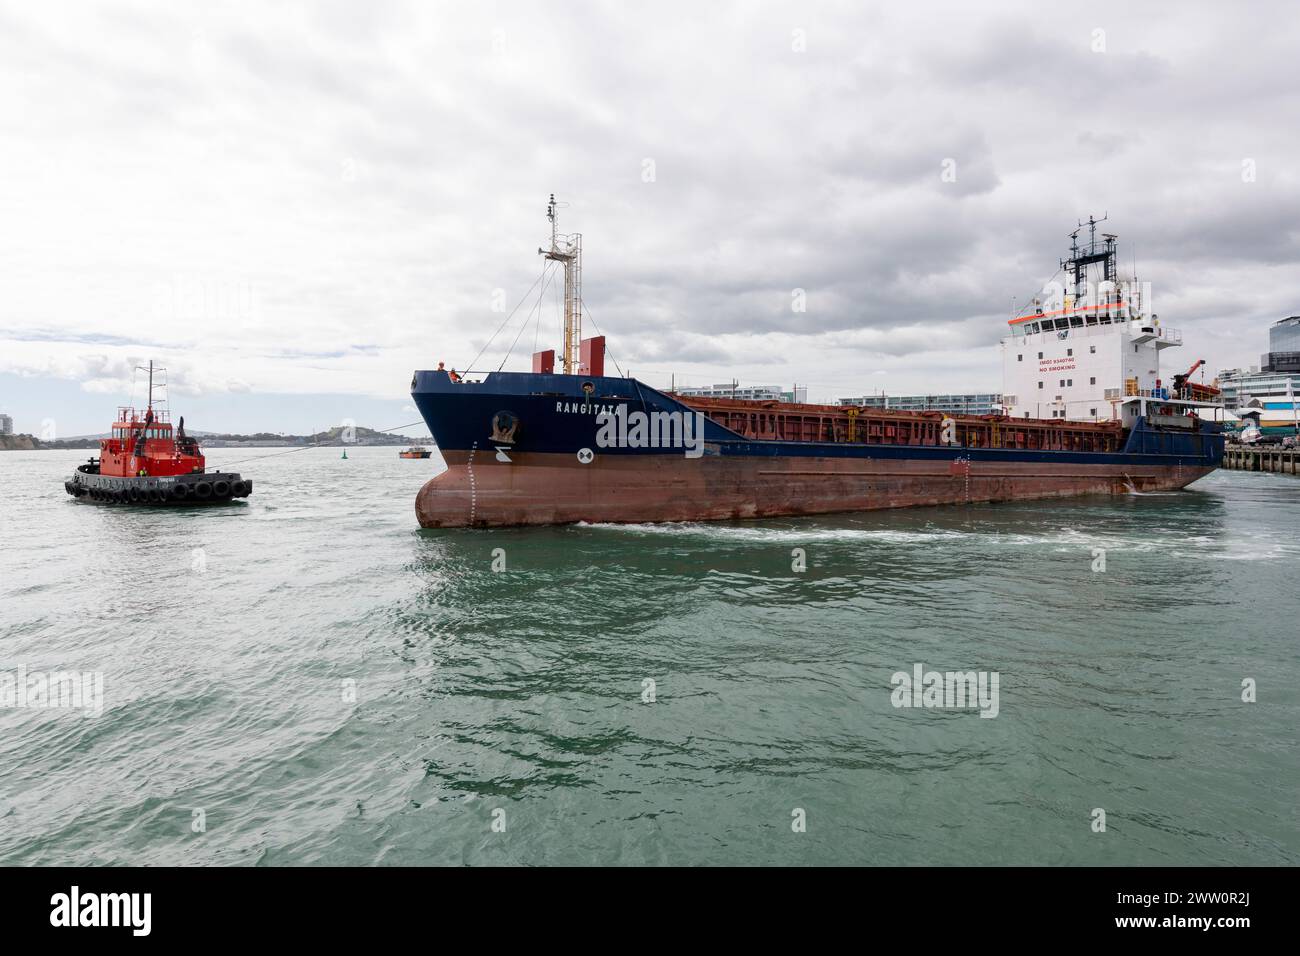 Two tug boats assist the Cargo ship Rangitata to get off the dock at Auckland. Stock Photo